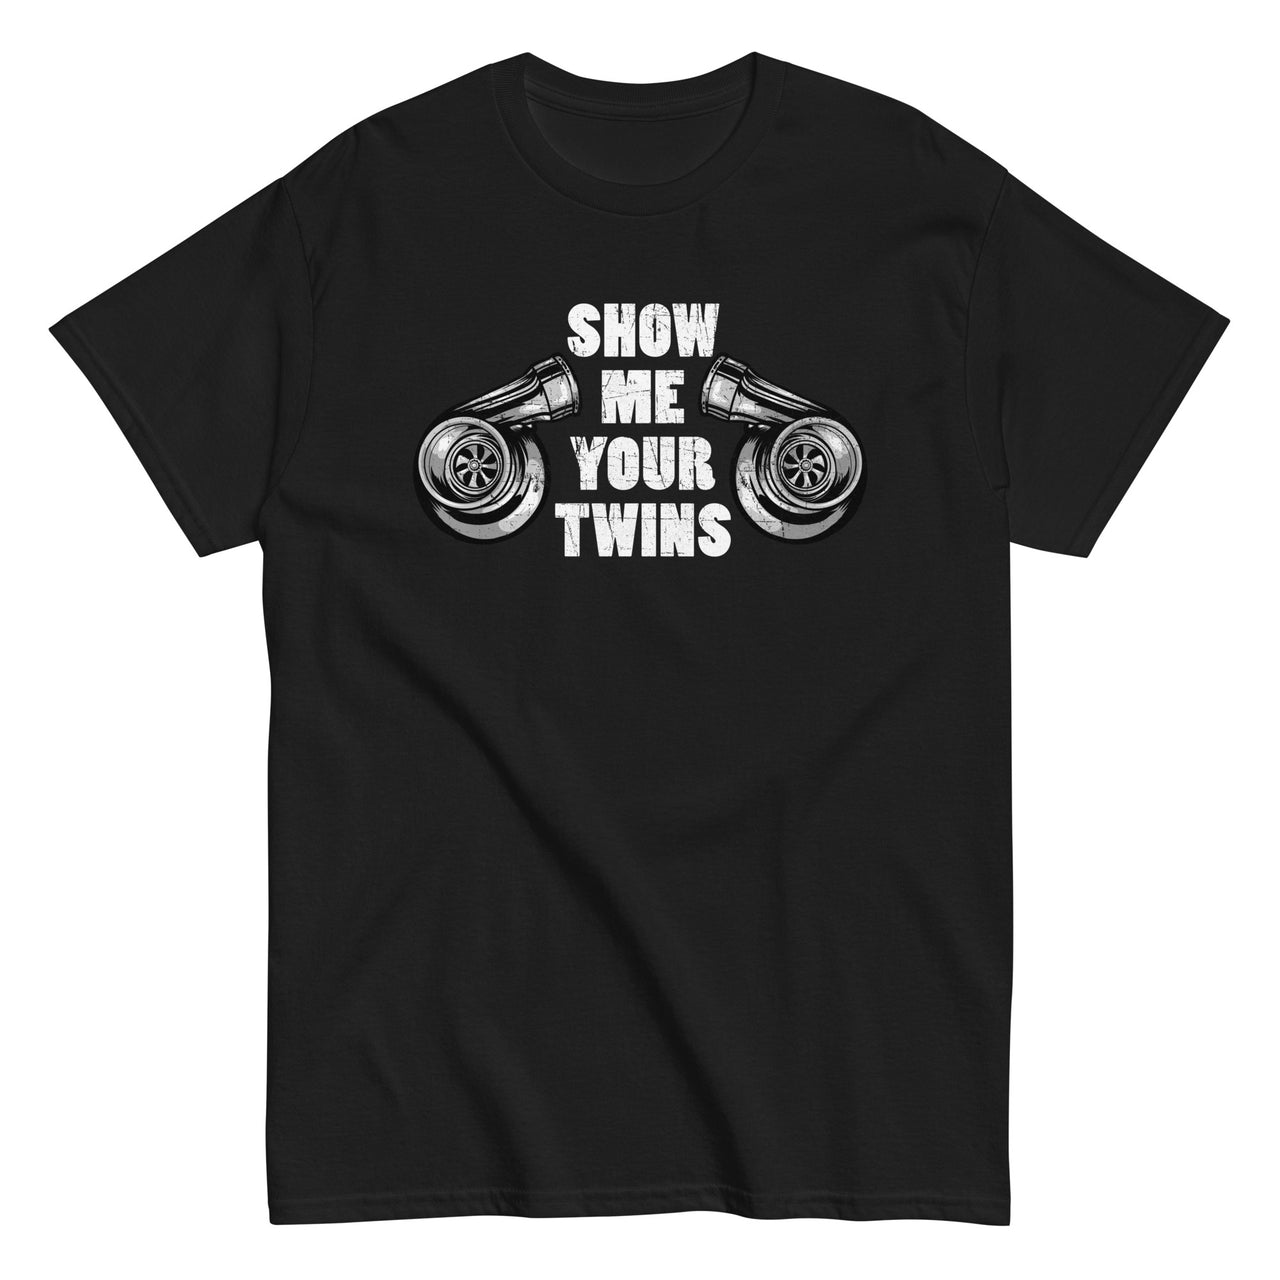 Show Me Your Twins Funny Turbo T-Shirt in black